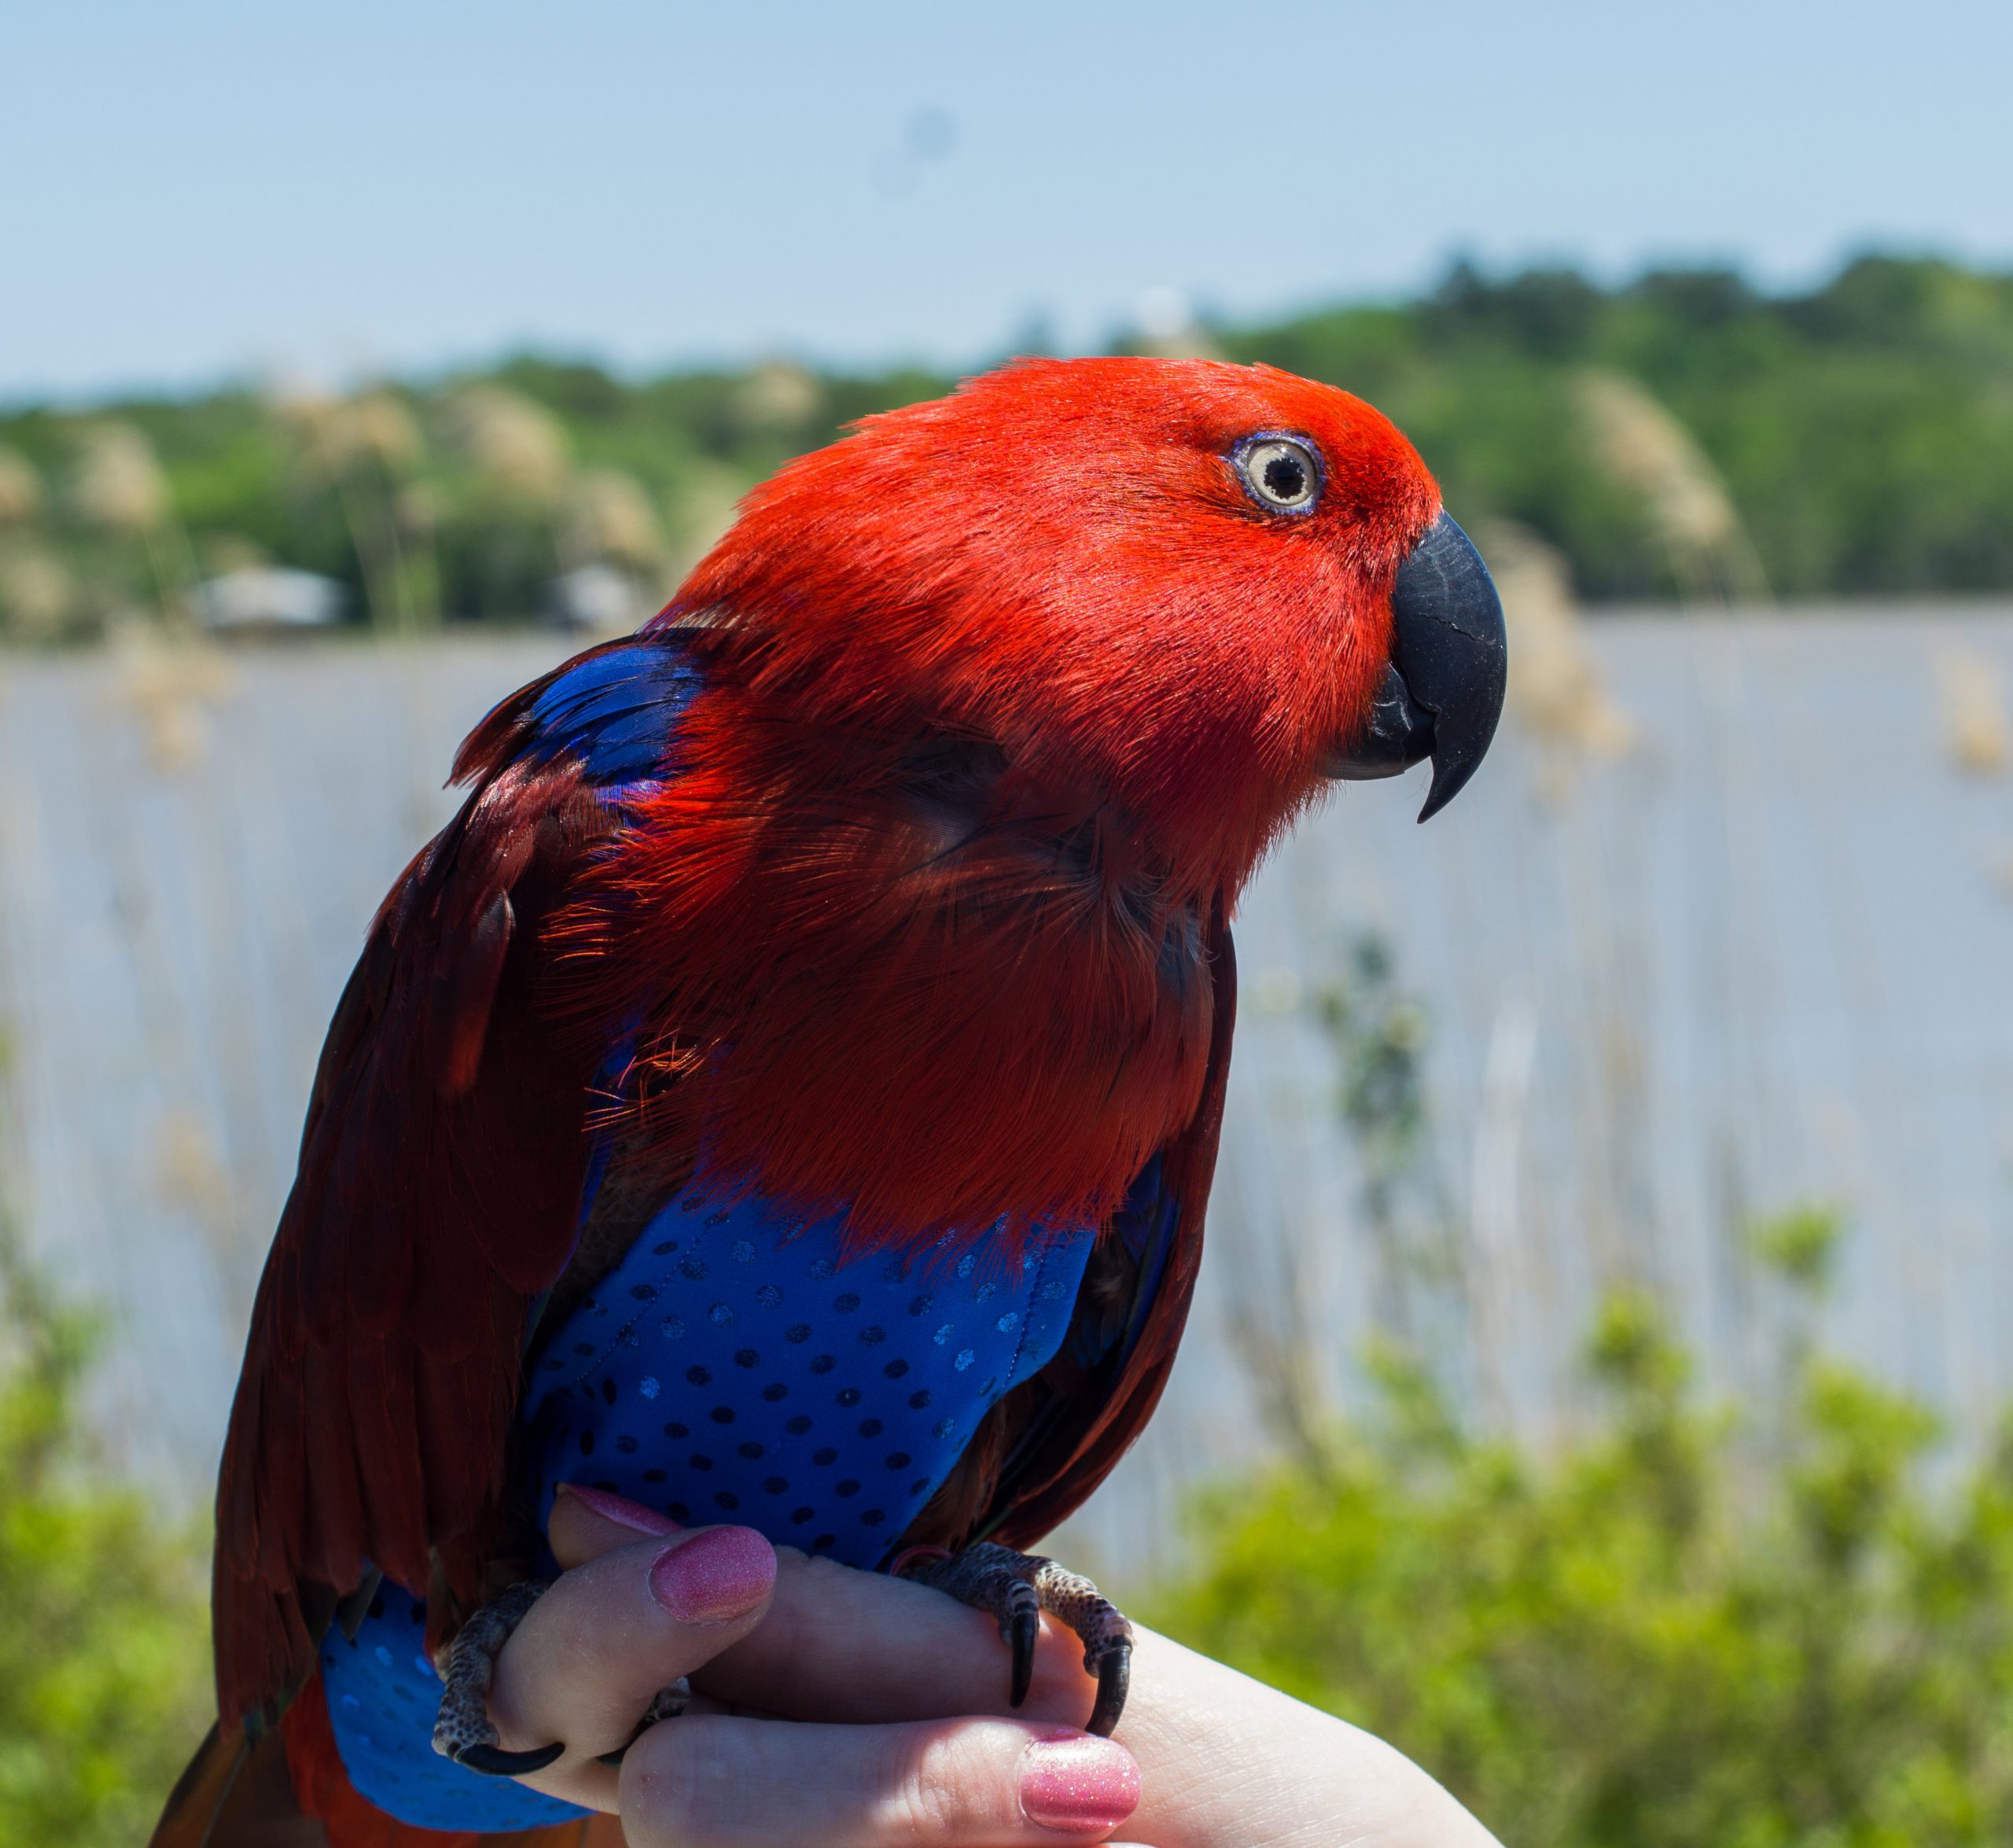 Parrot by the bay